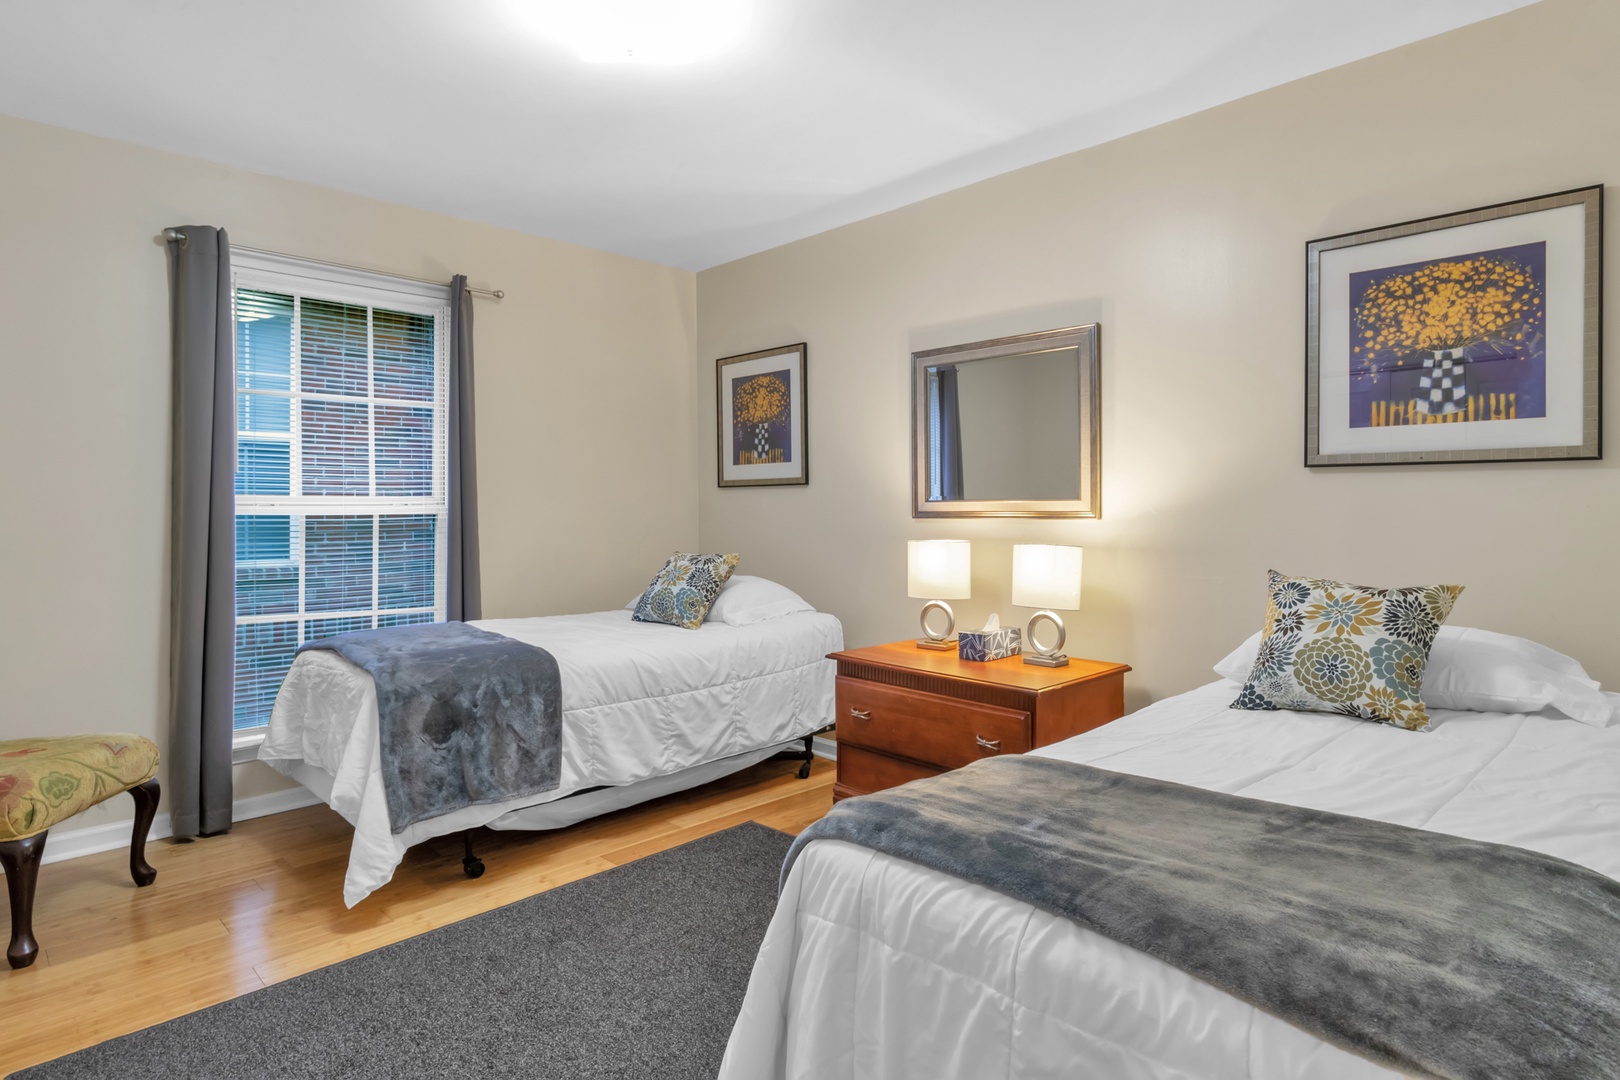 The final bedroom offers a pair of cozy twin beds